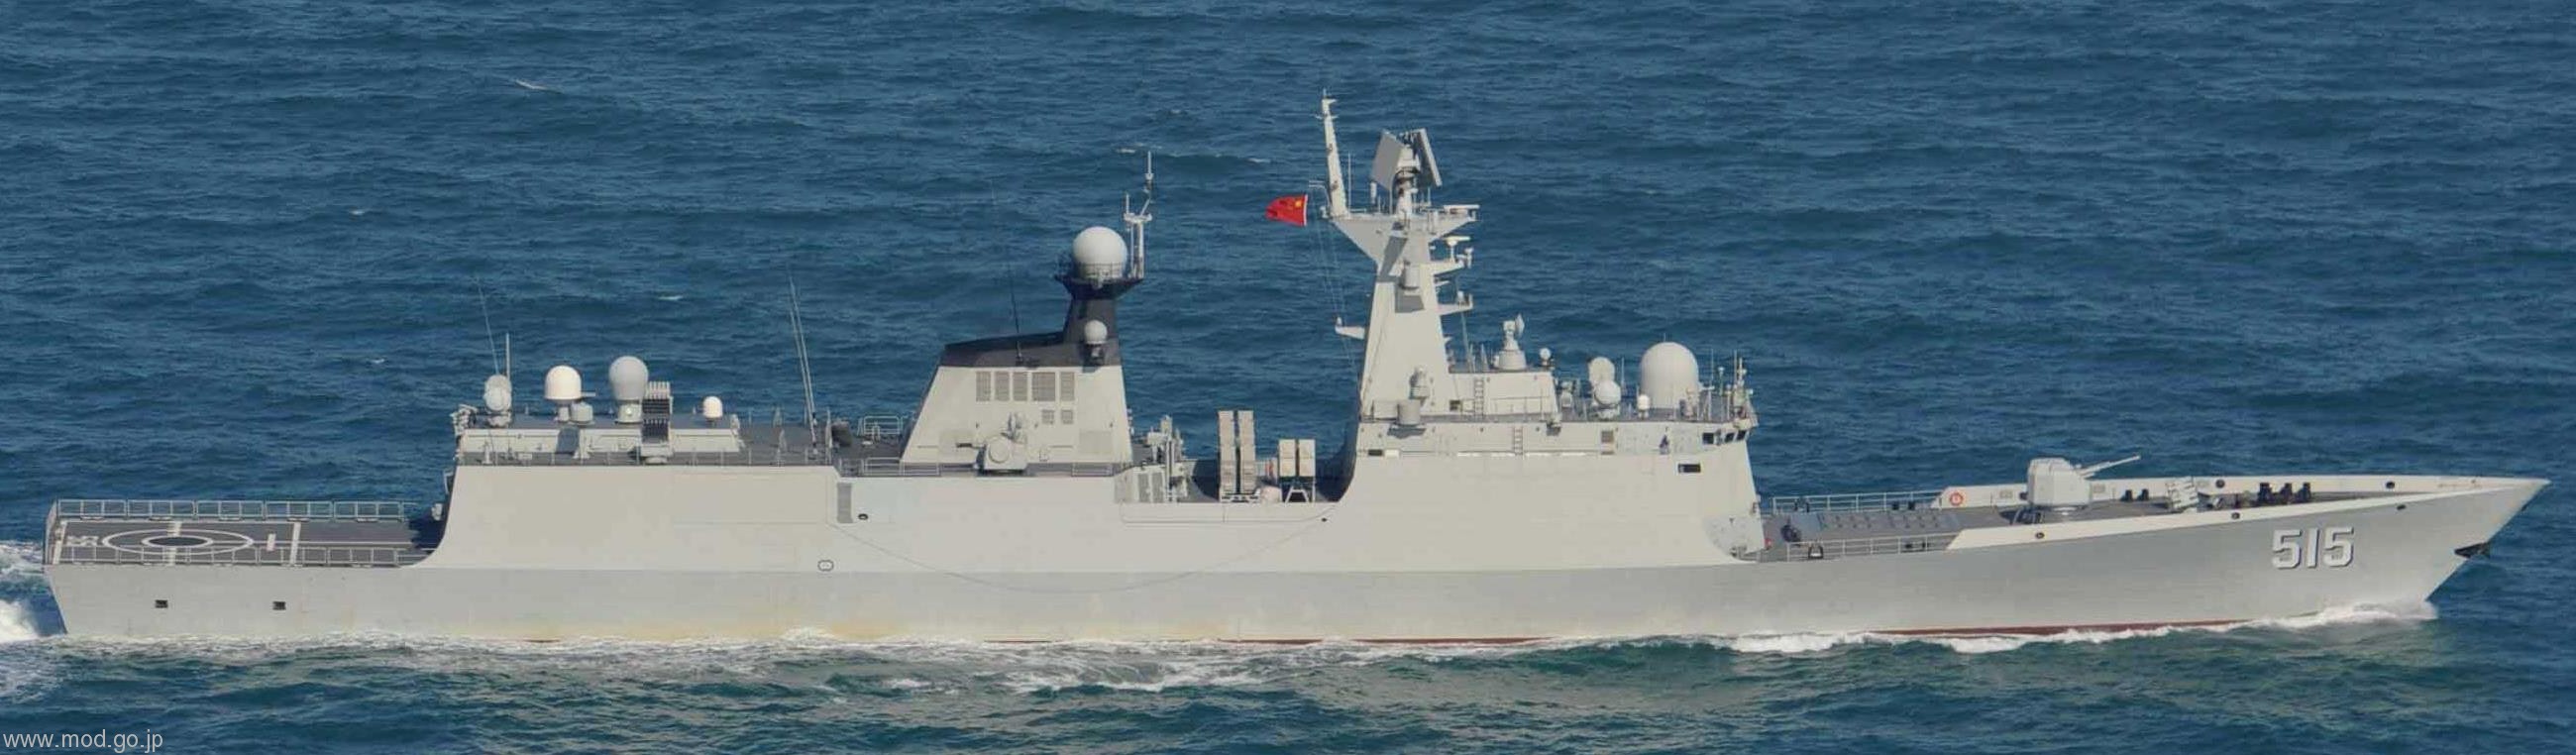 ffg-515 plans binzhou type 054a jiangkai ii class guided missile frigate china people's liberation army navy 02